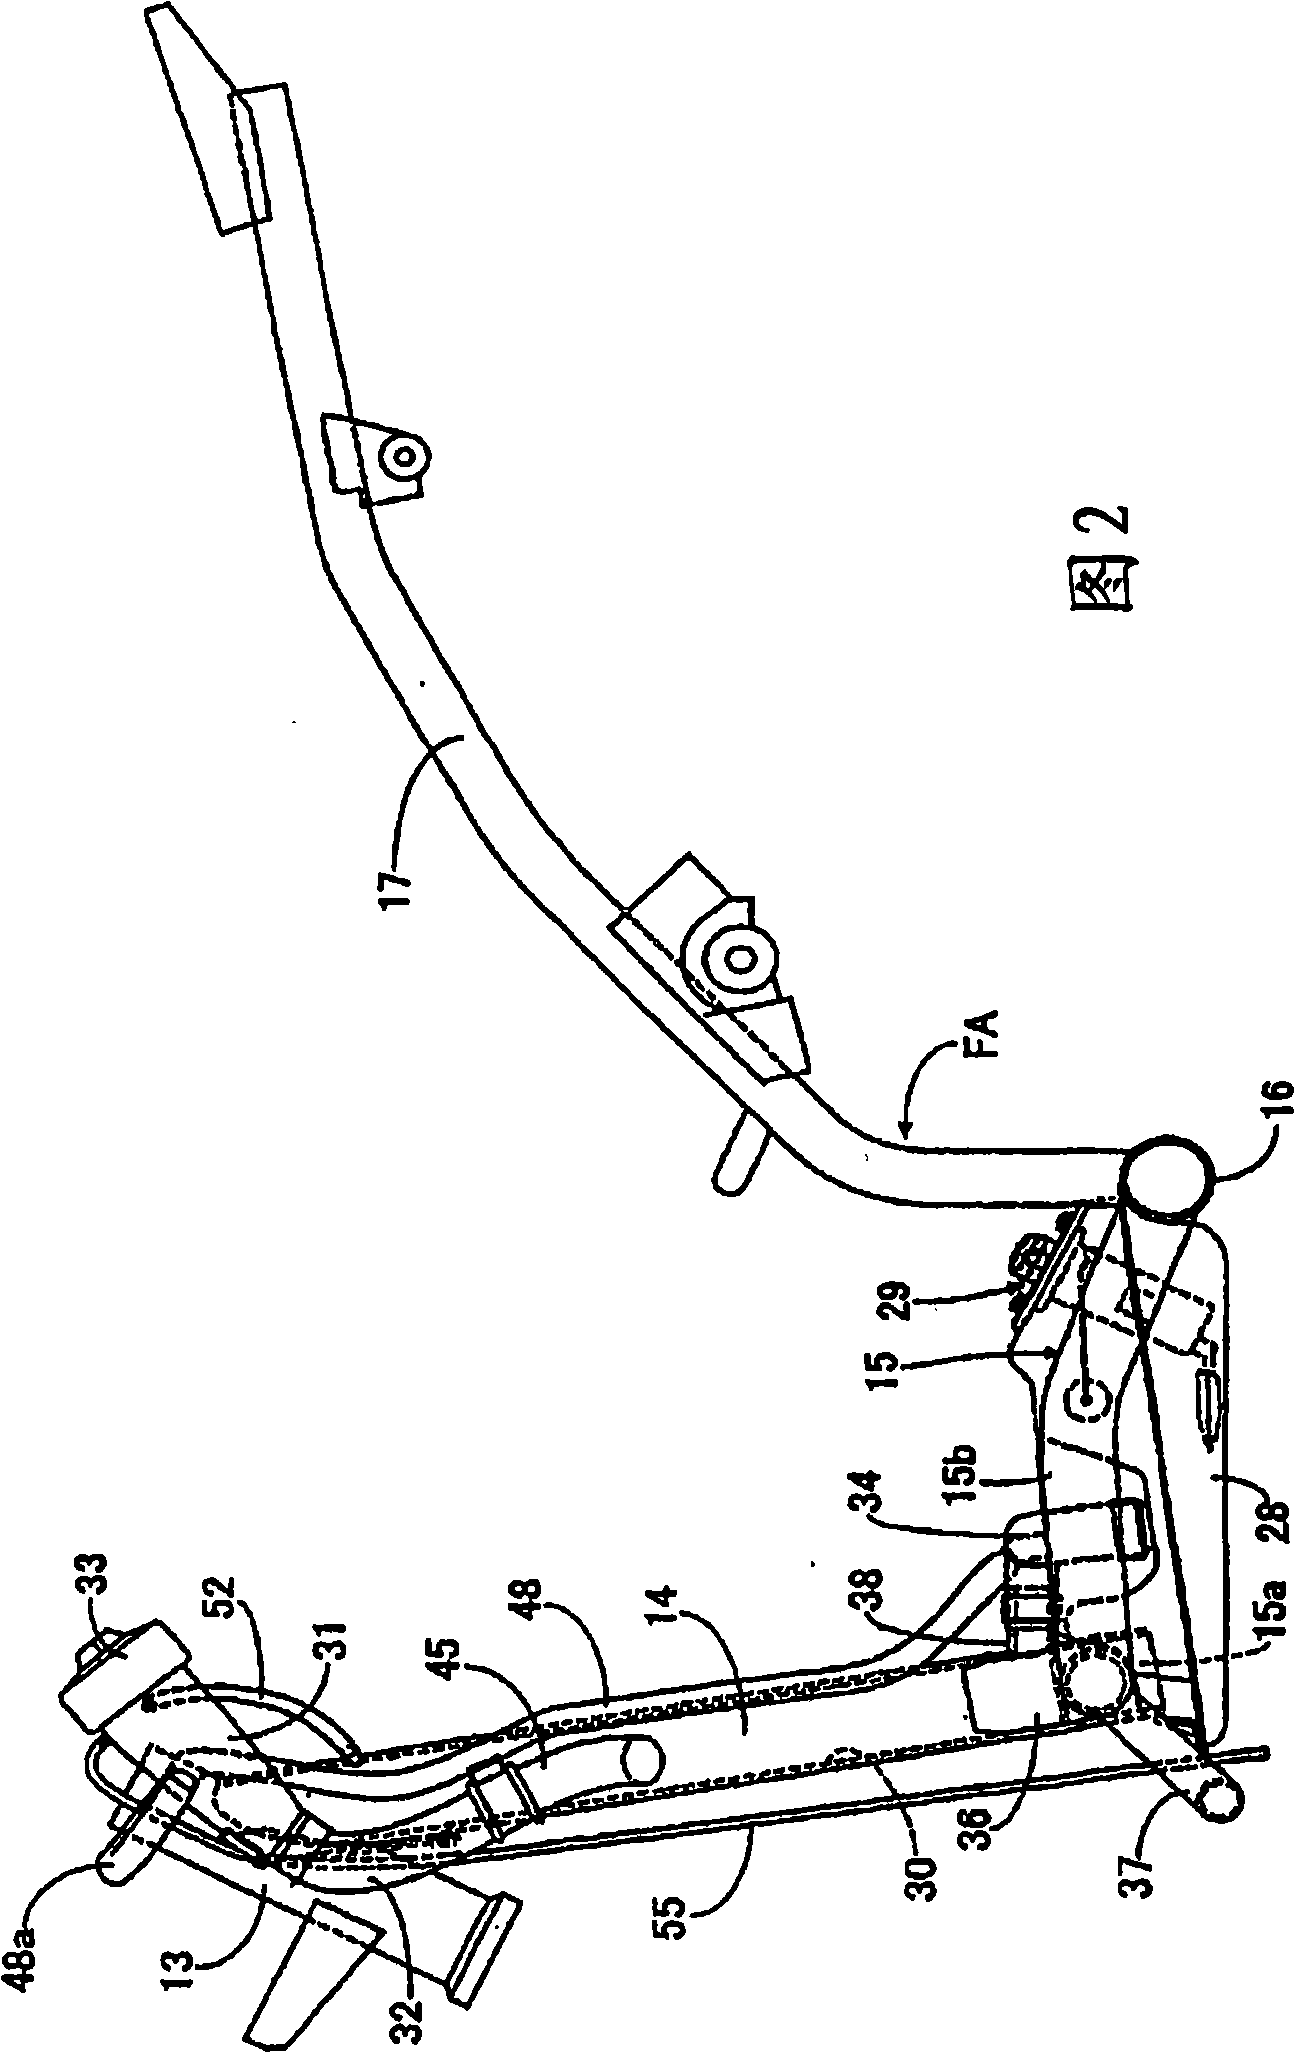 Fuel supply structure for small-type vehicle